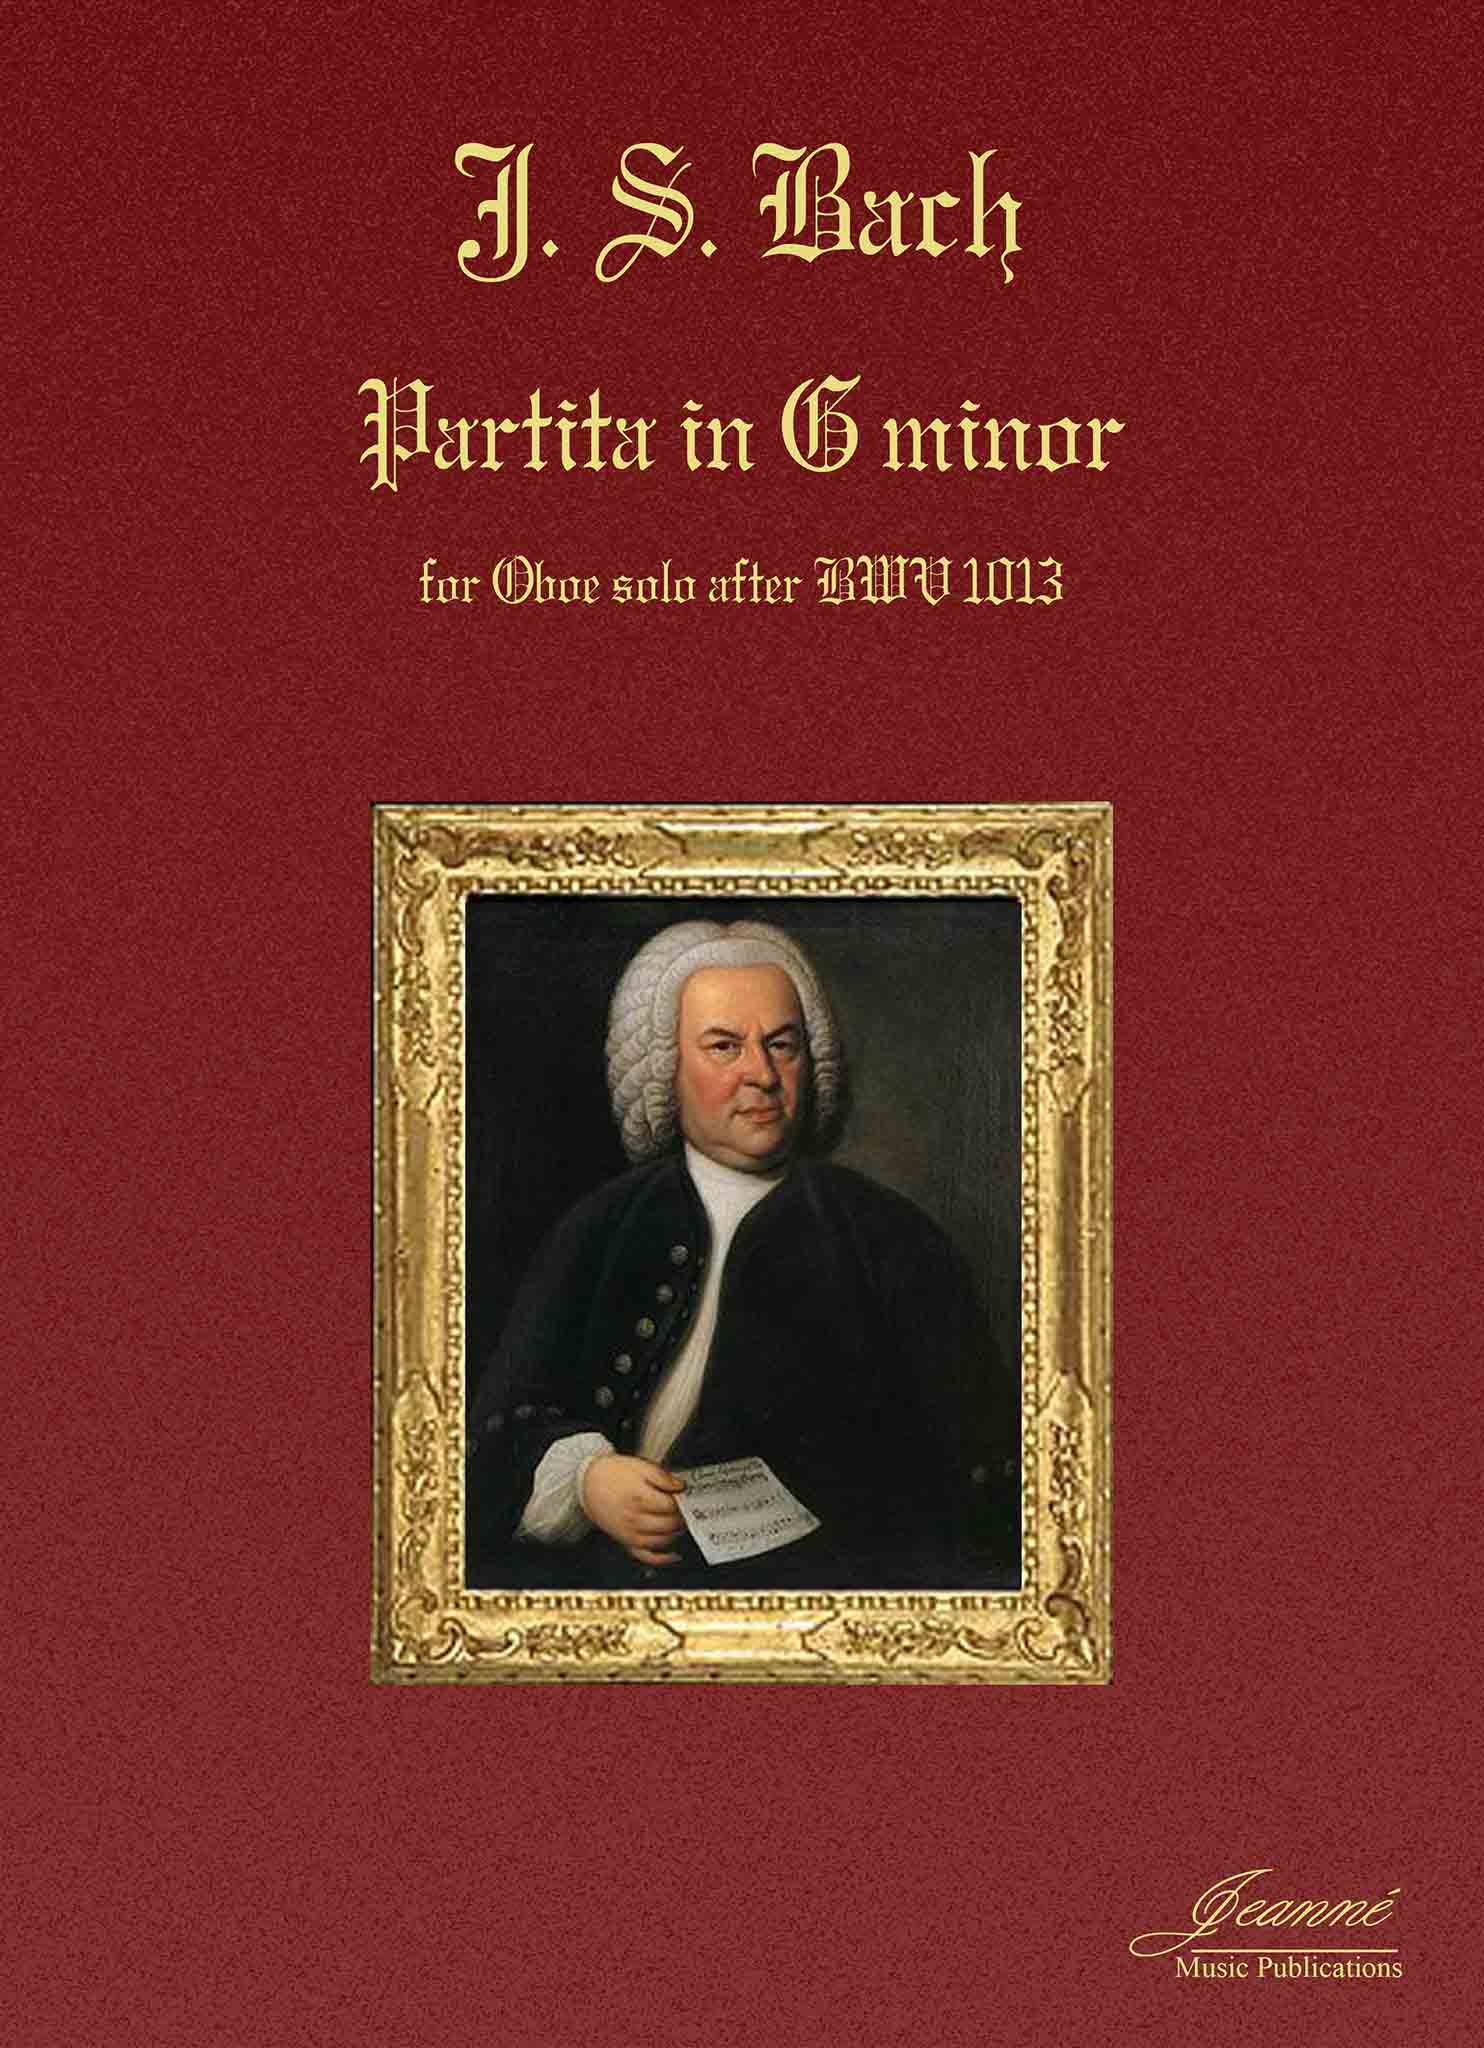 Partita in A Minor BWV 1013 by J. S. Bach for Guitar